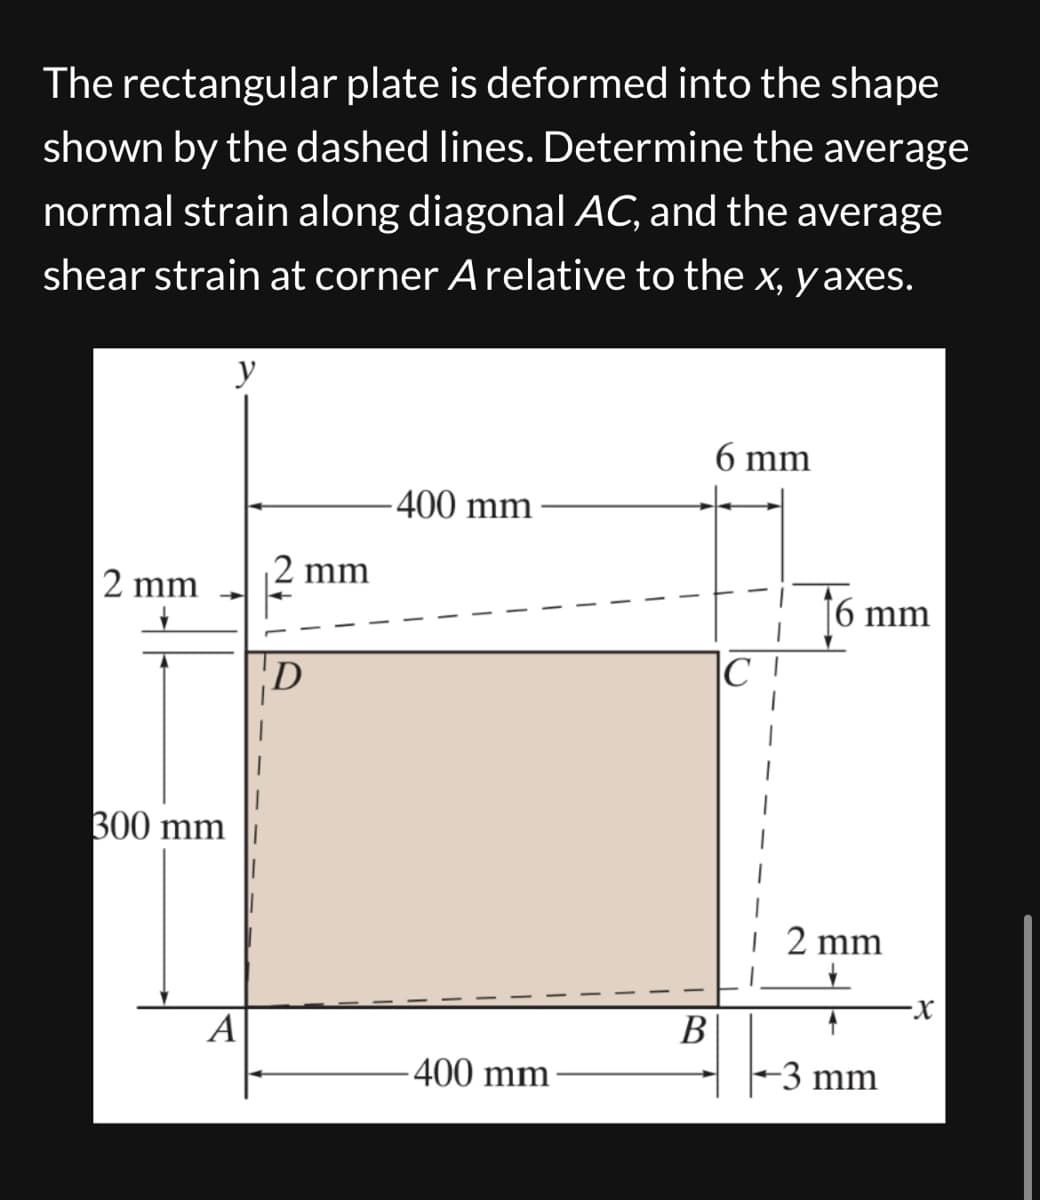 The rectangular plate is deformed into the shape
shown by the dashed lines. Determine the average
normal strain along diagonal AC, and the average
shear strain at corner A relative to the x, y axes.
y
6 mm
-400 mm
2 mm
2 mm
300 mm
16 mm
2 mm
x
A
B
-400 mm
-3 mm